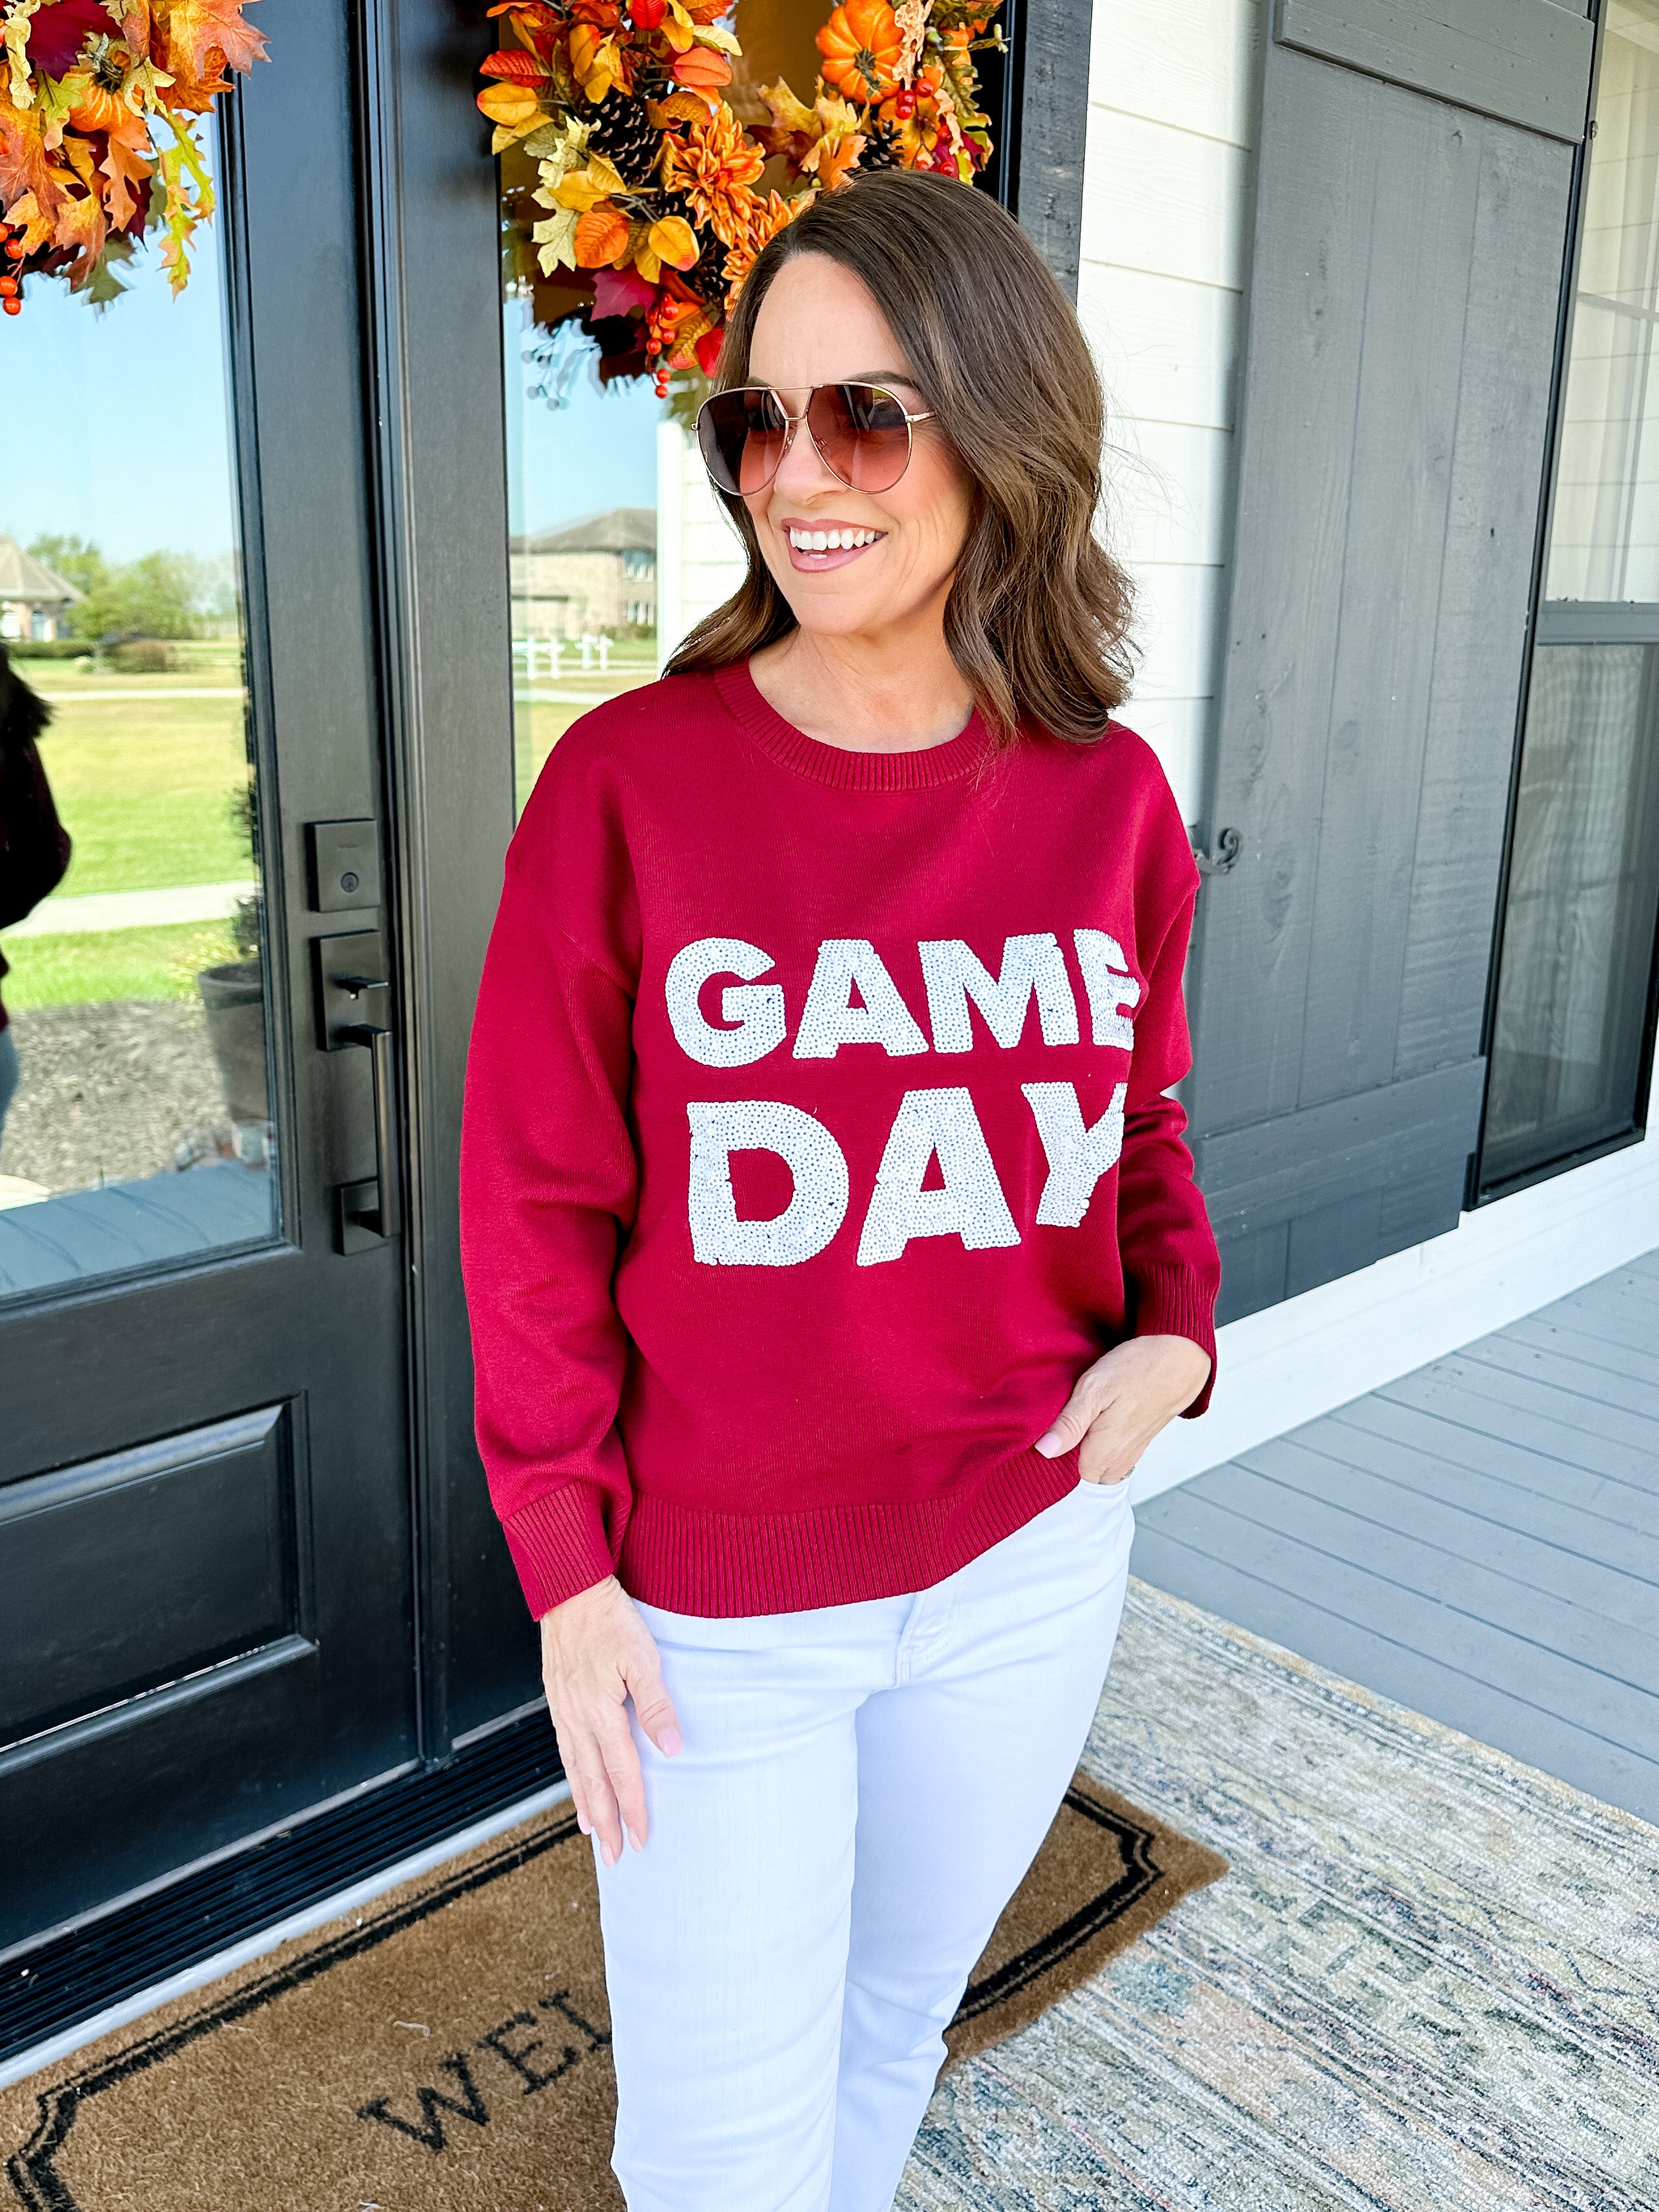 Gameday Sequin Sweater in Crm/White